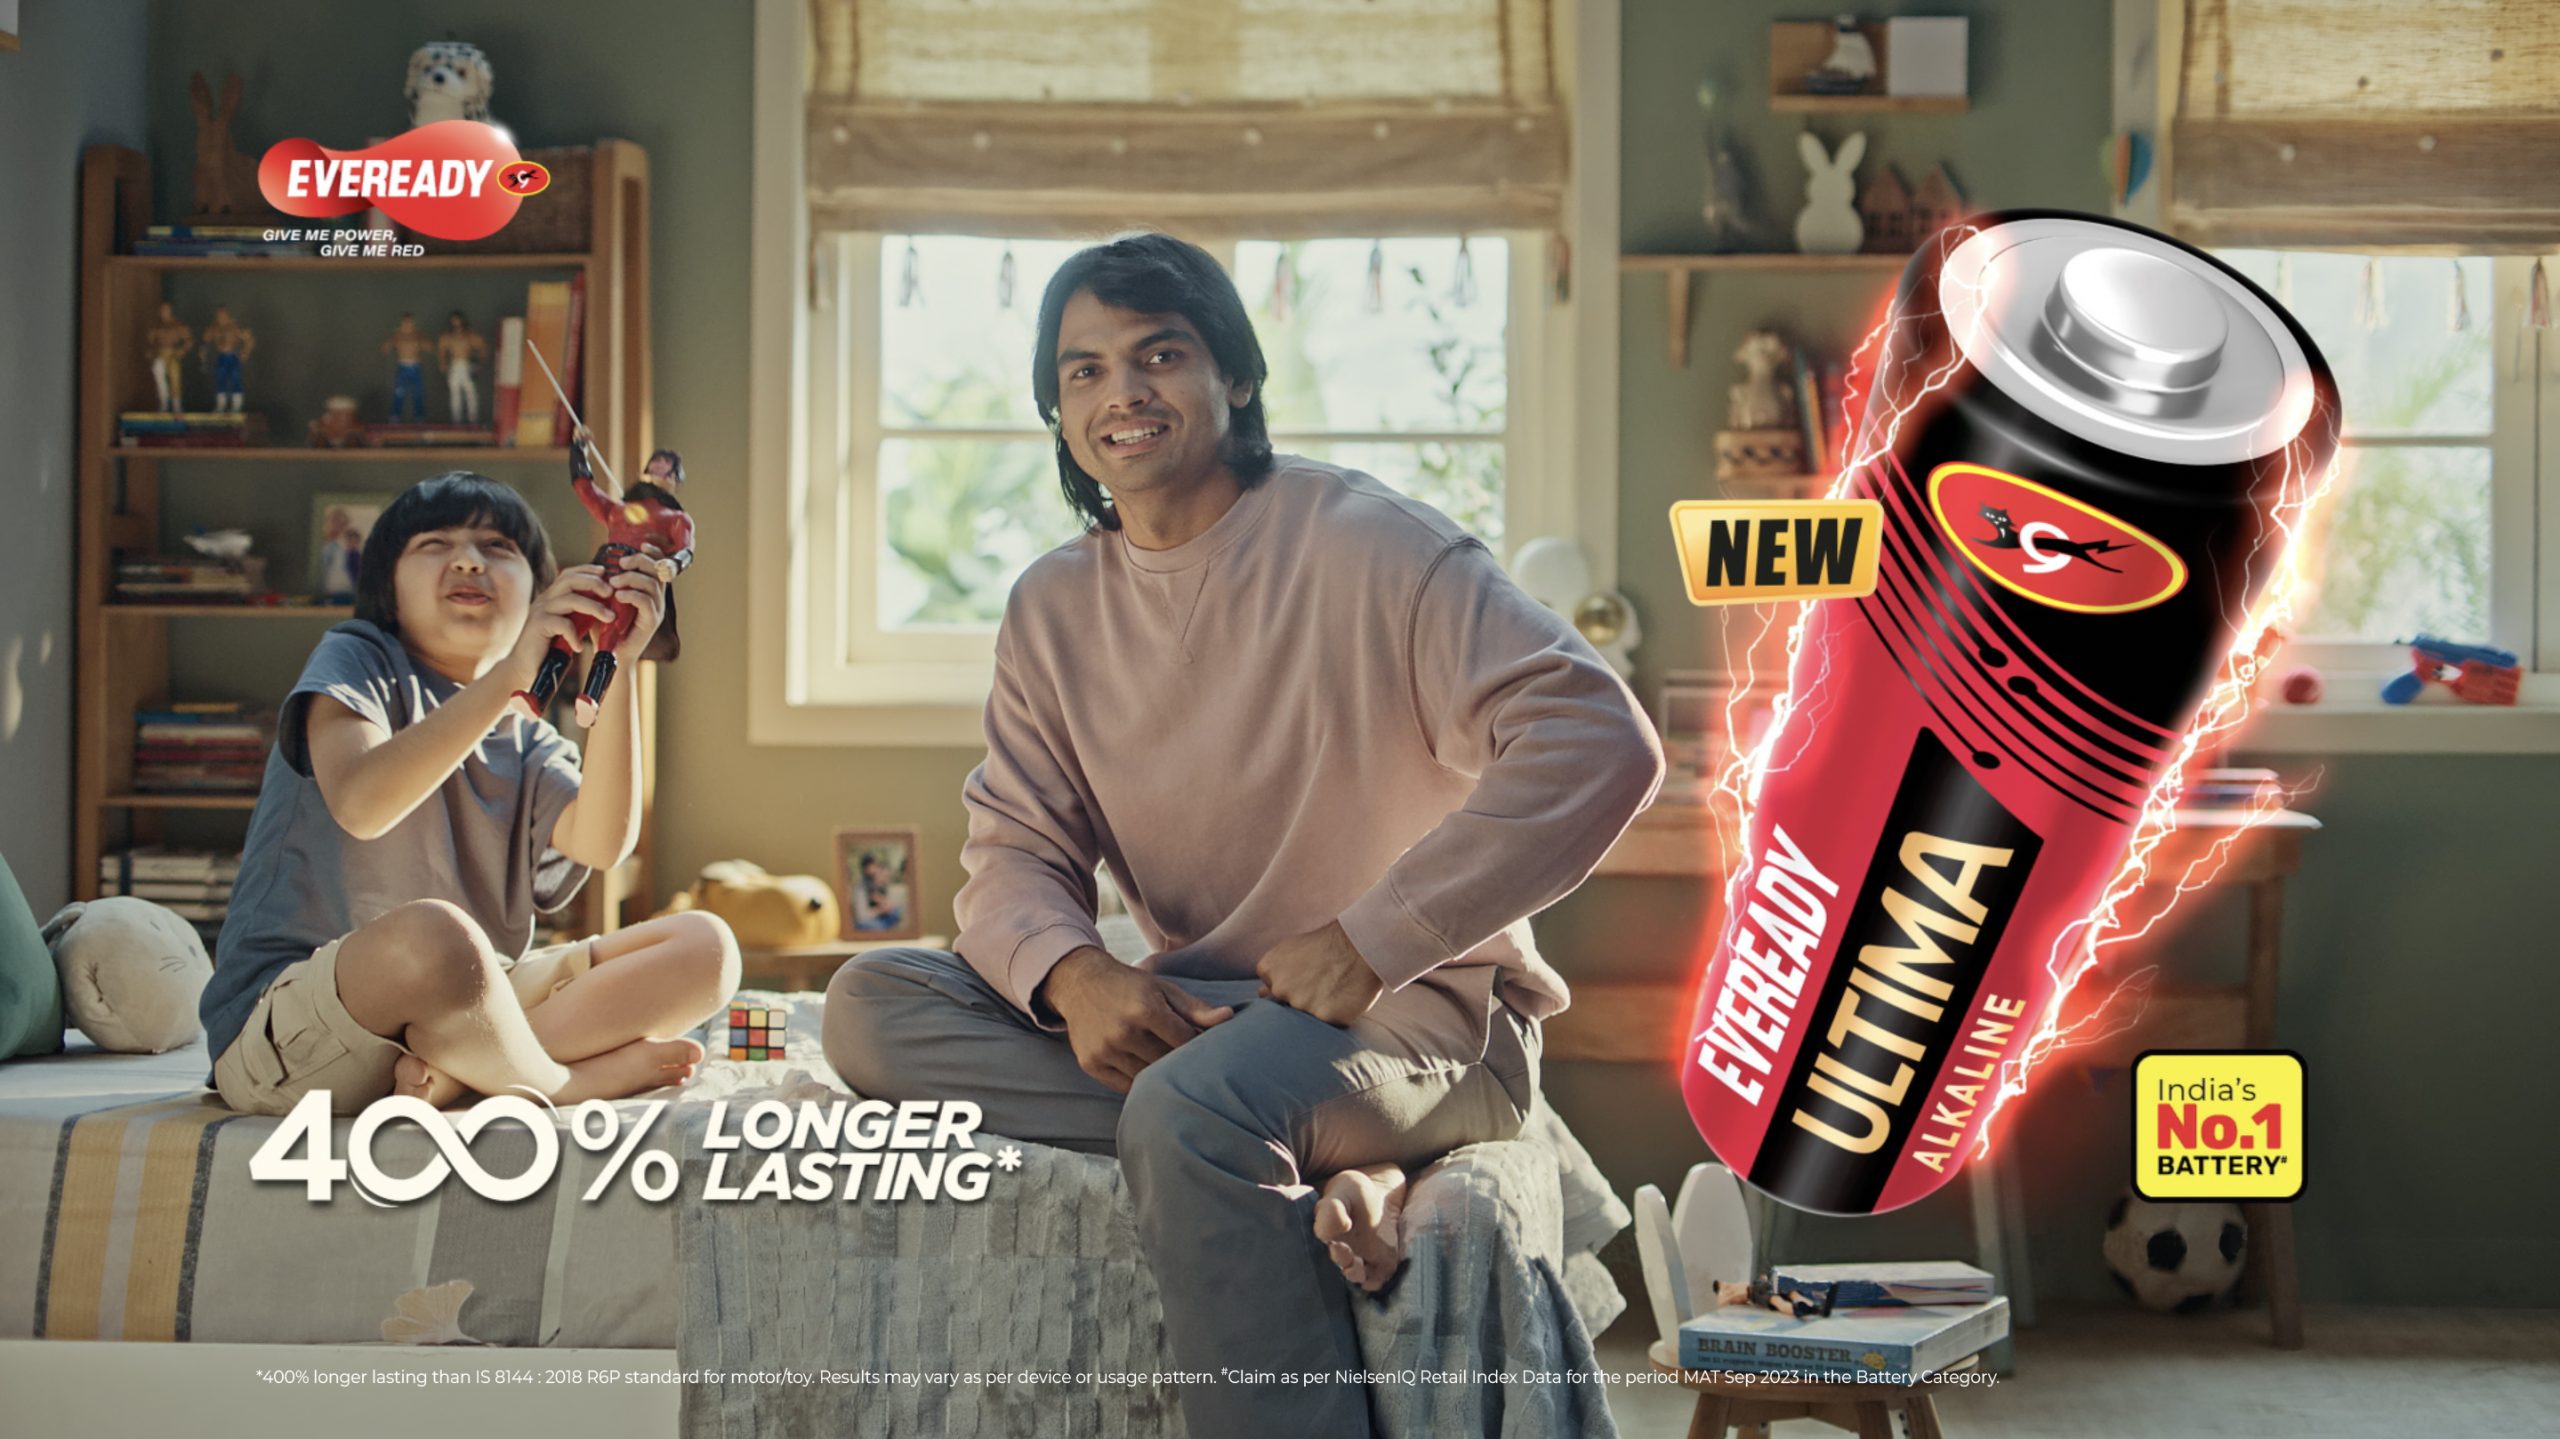 Neeraj Chopra features in the latest TVC of Eveready's Ultima Alkaline battery.